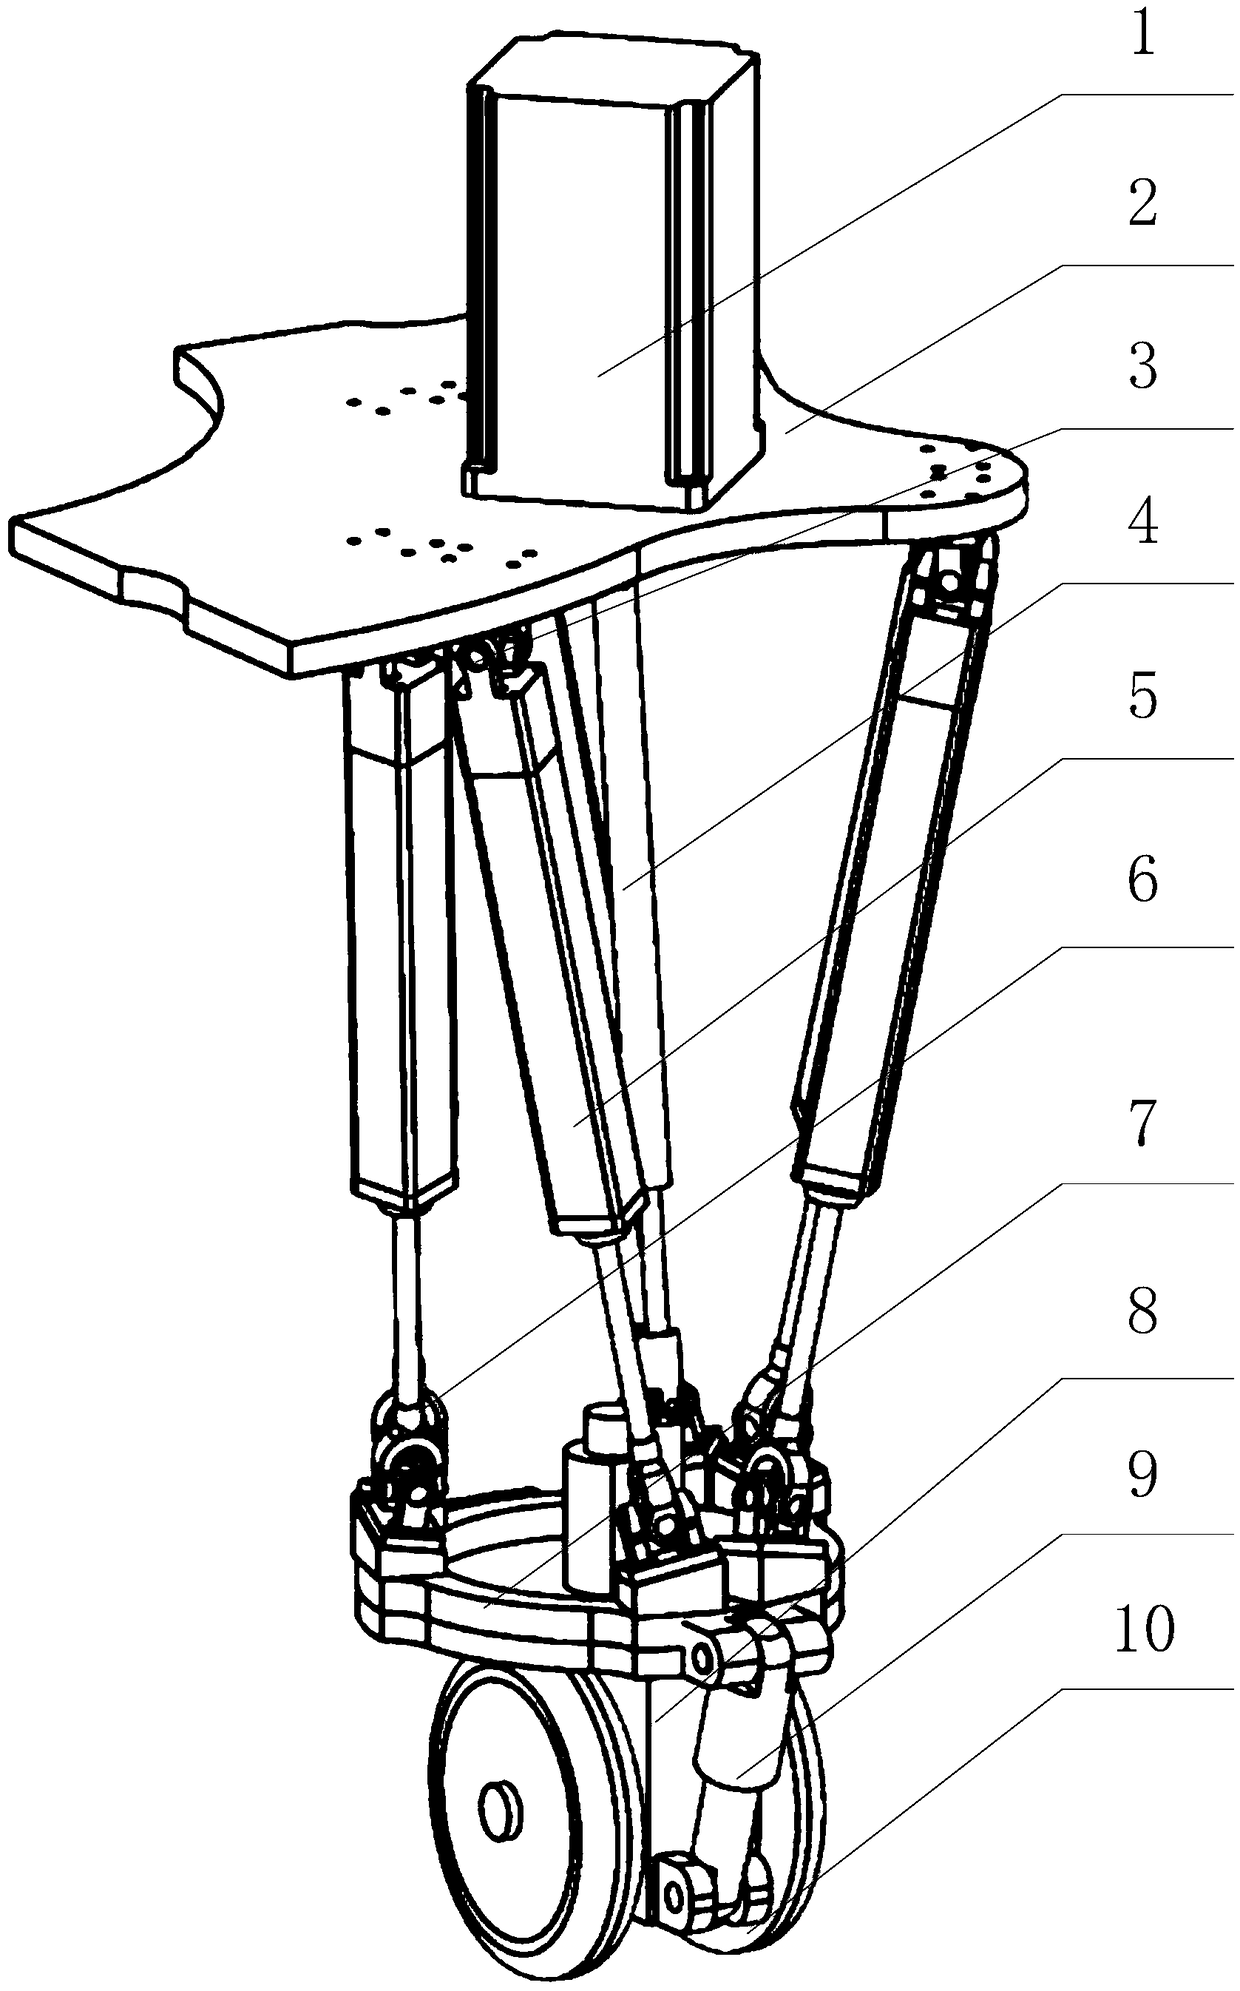 Parallel compliant wheel foot device for wheeled robot